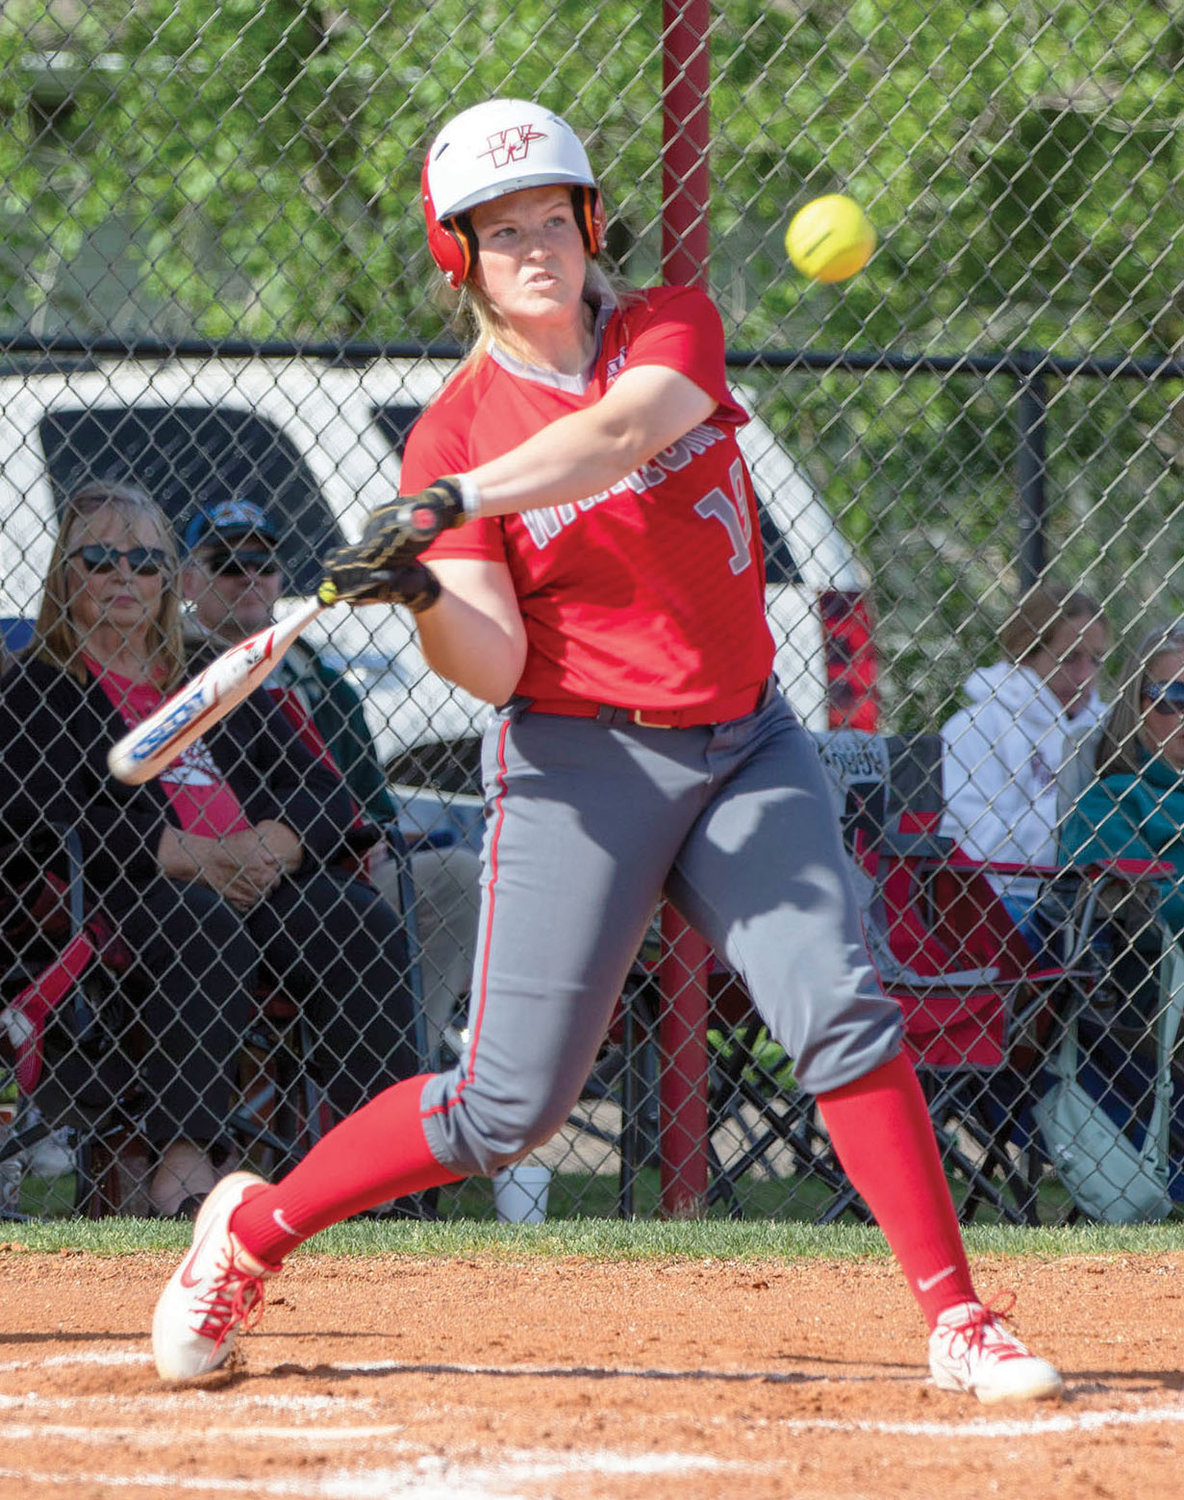 Washington junior Maggie Place pounds a ball during the Warriors’ 11-3 win over Plainview. Place hit two home runs in the game.